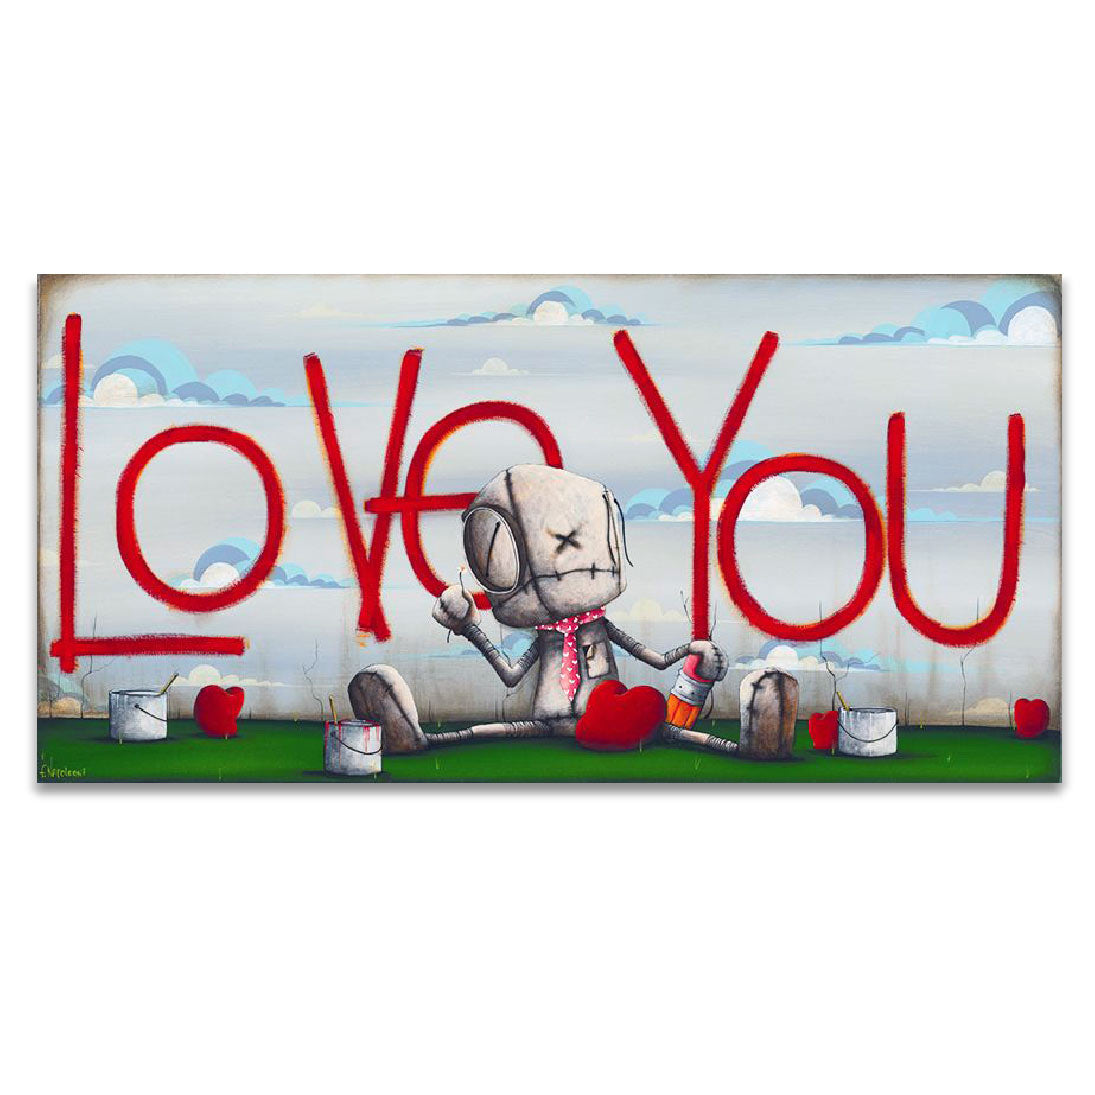 Fabio Napoleoni "I Want The World to Know" Limited Edition Paper Giclee